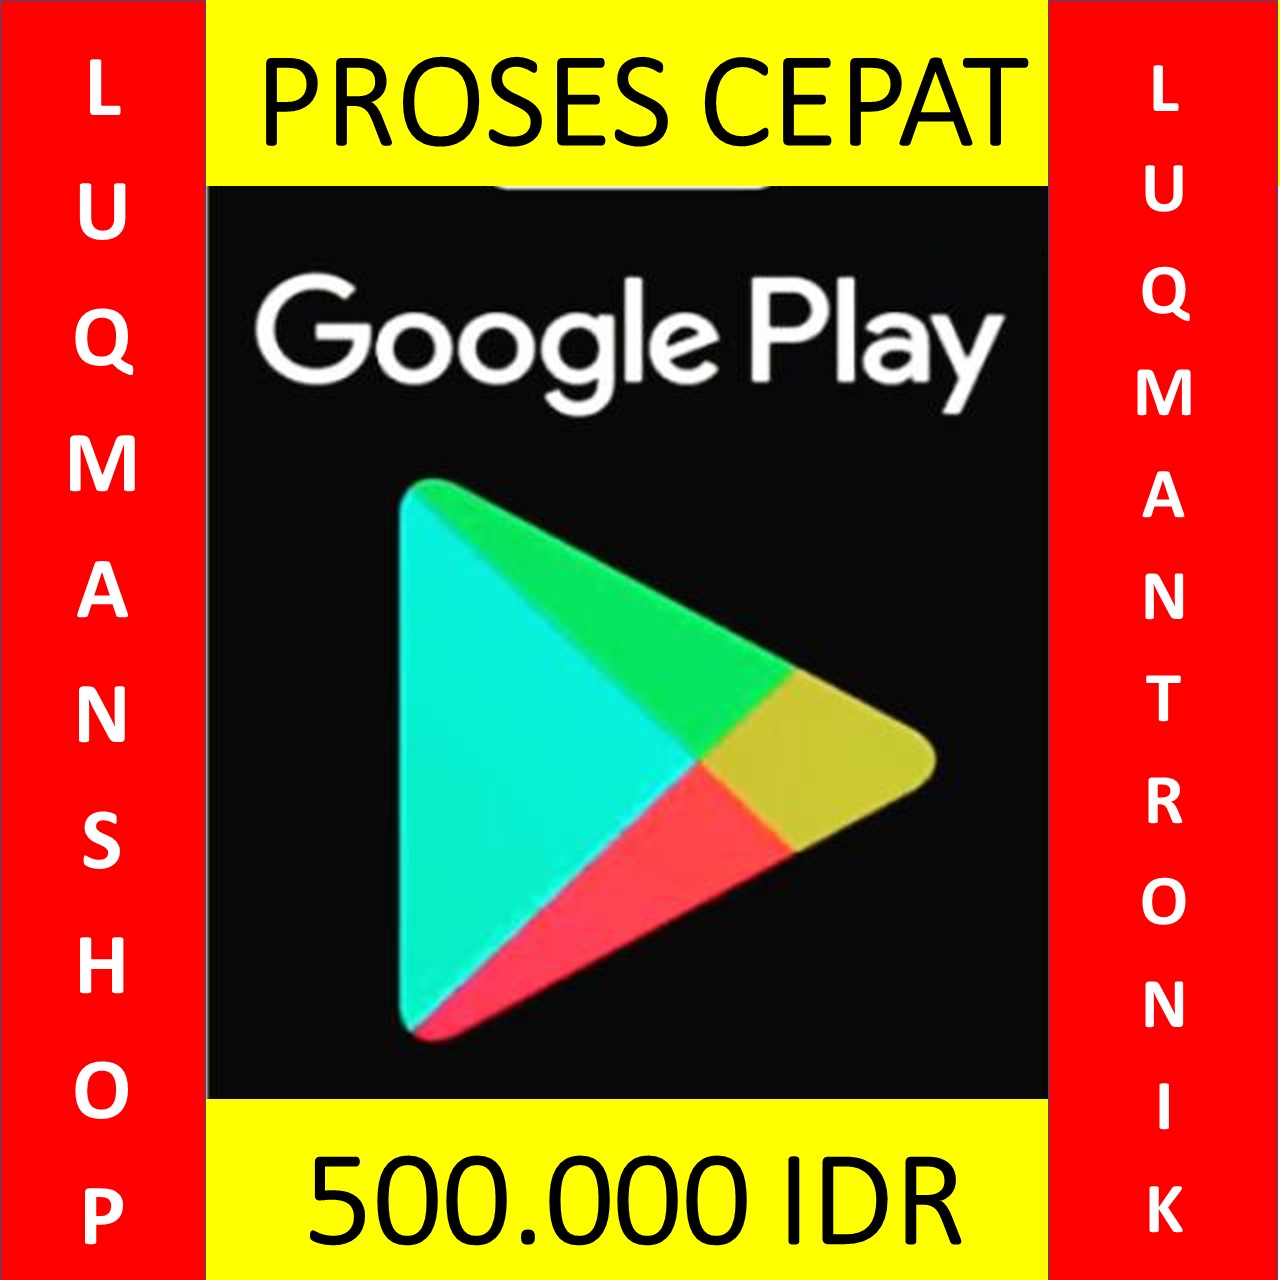 Voucher Game GOOGLE PLAY INDONESIA - Google Play Gift Card Indonesia Rp. 500.000